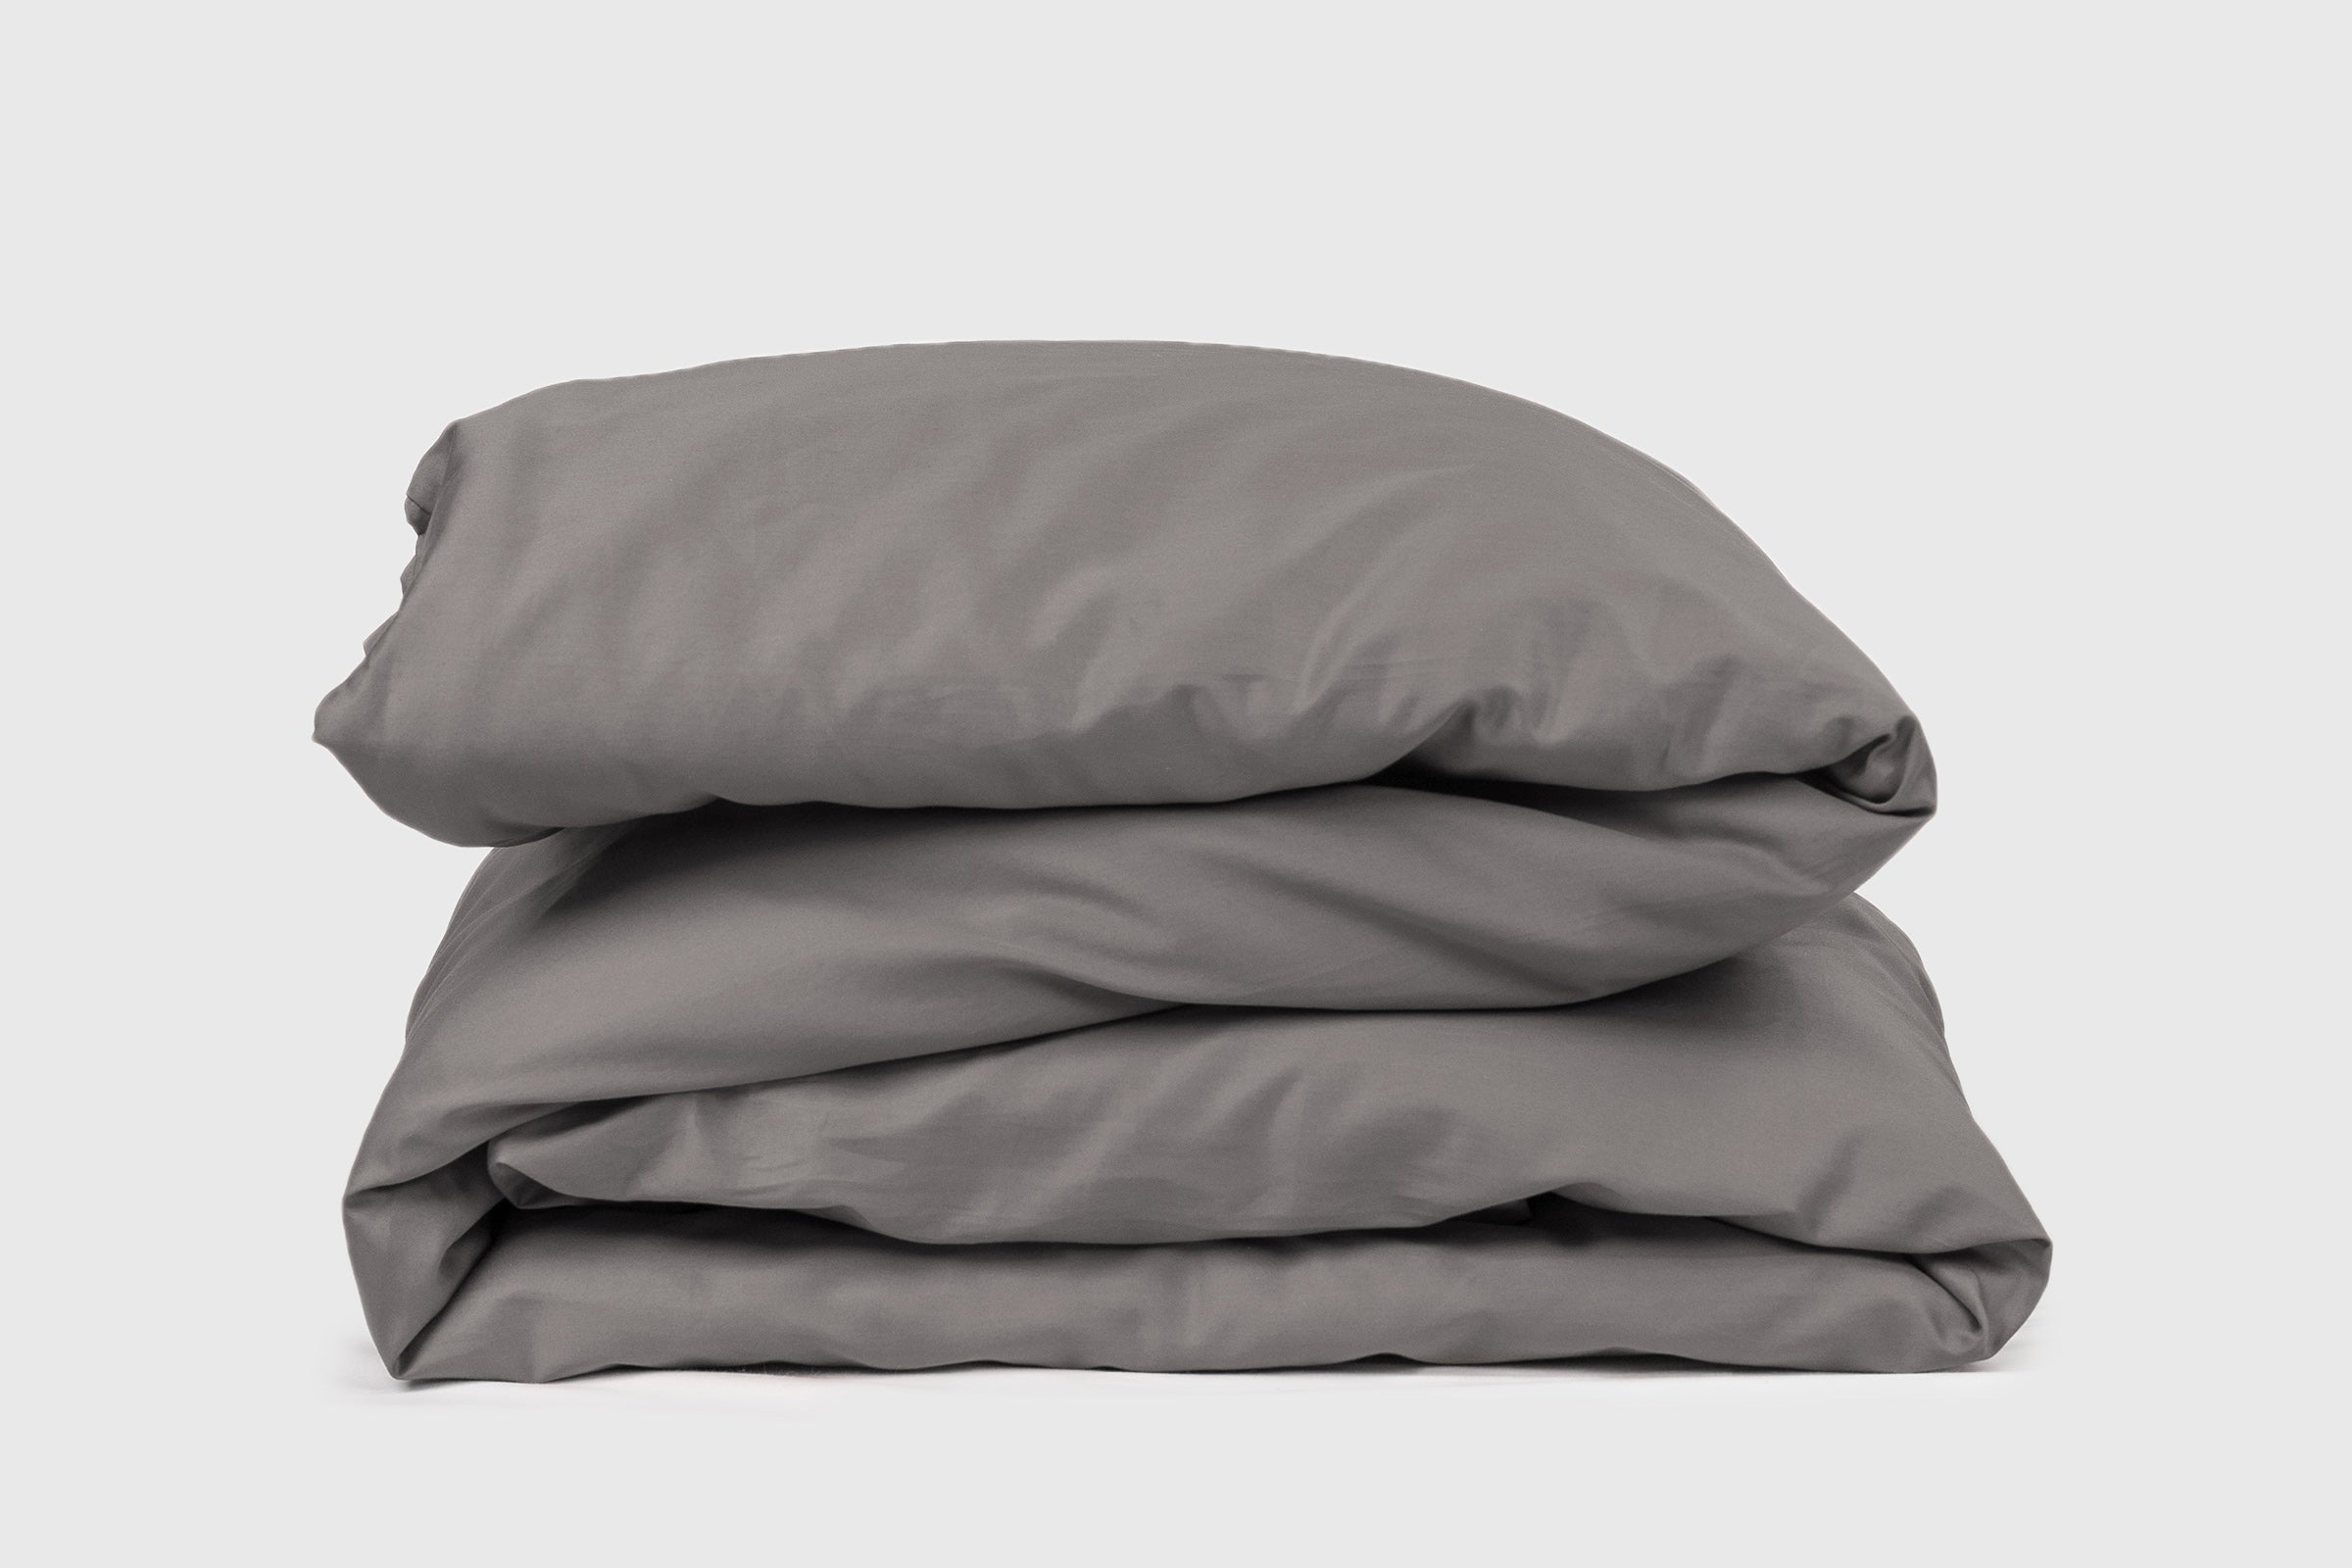 classic-stone-duvet-cover-product-shot-by-sojao.jpg